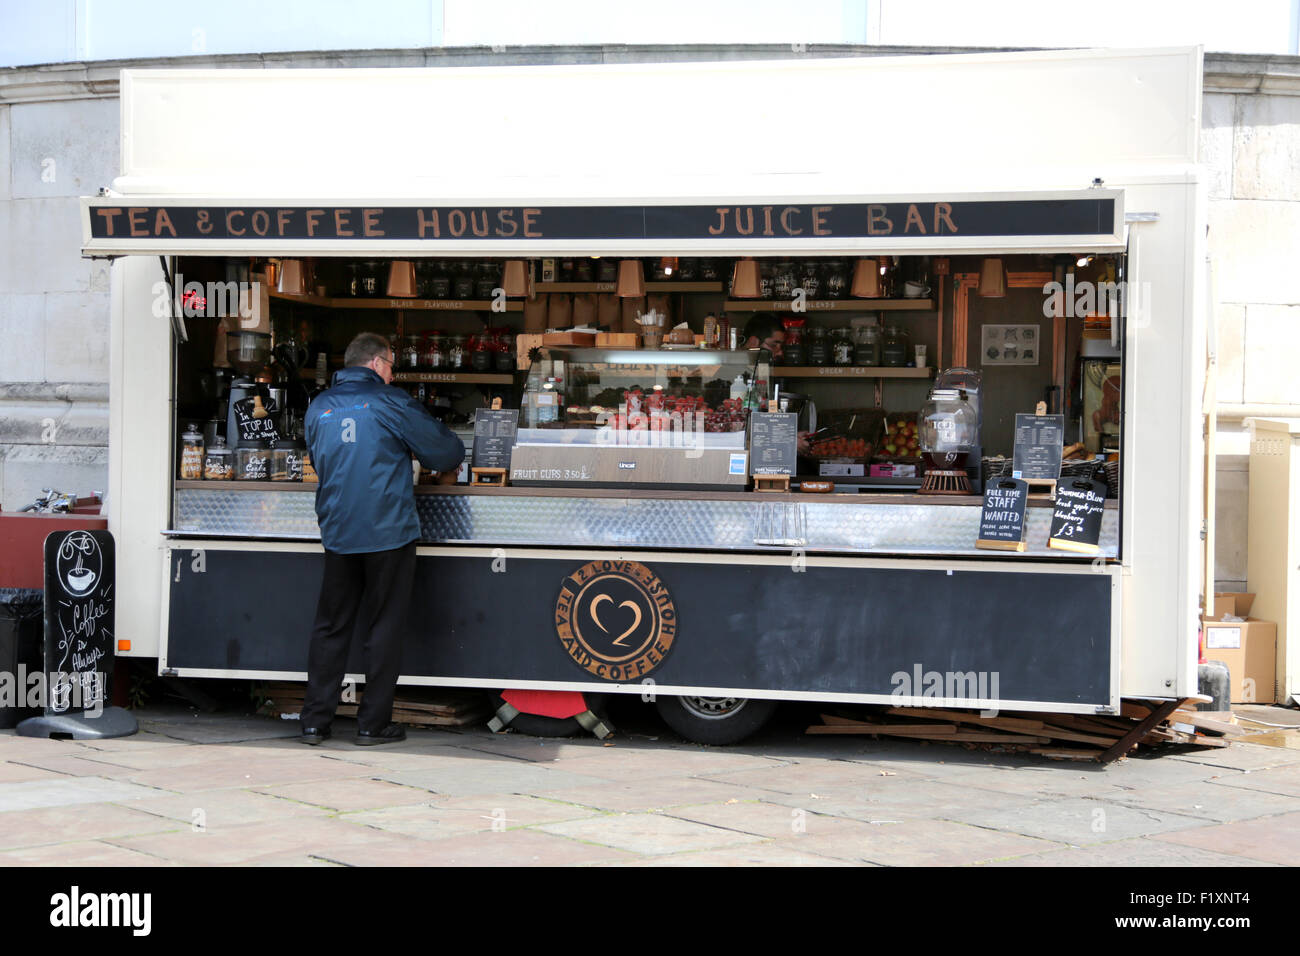 A man being served at a coffee stop on the south bank in london. The coffee house is a recommended coffee shop in London Stock Photo